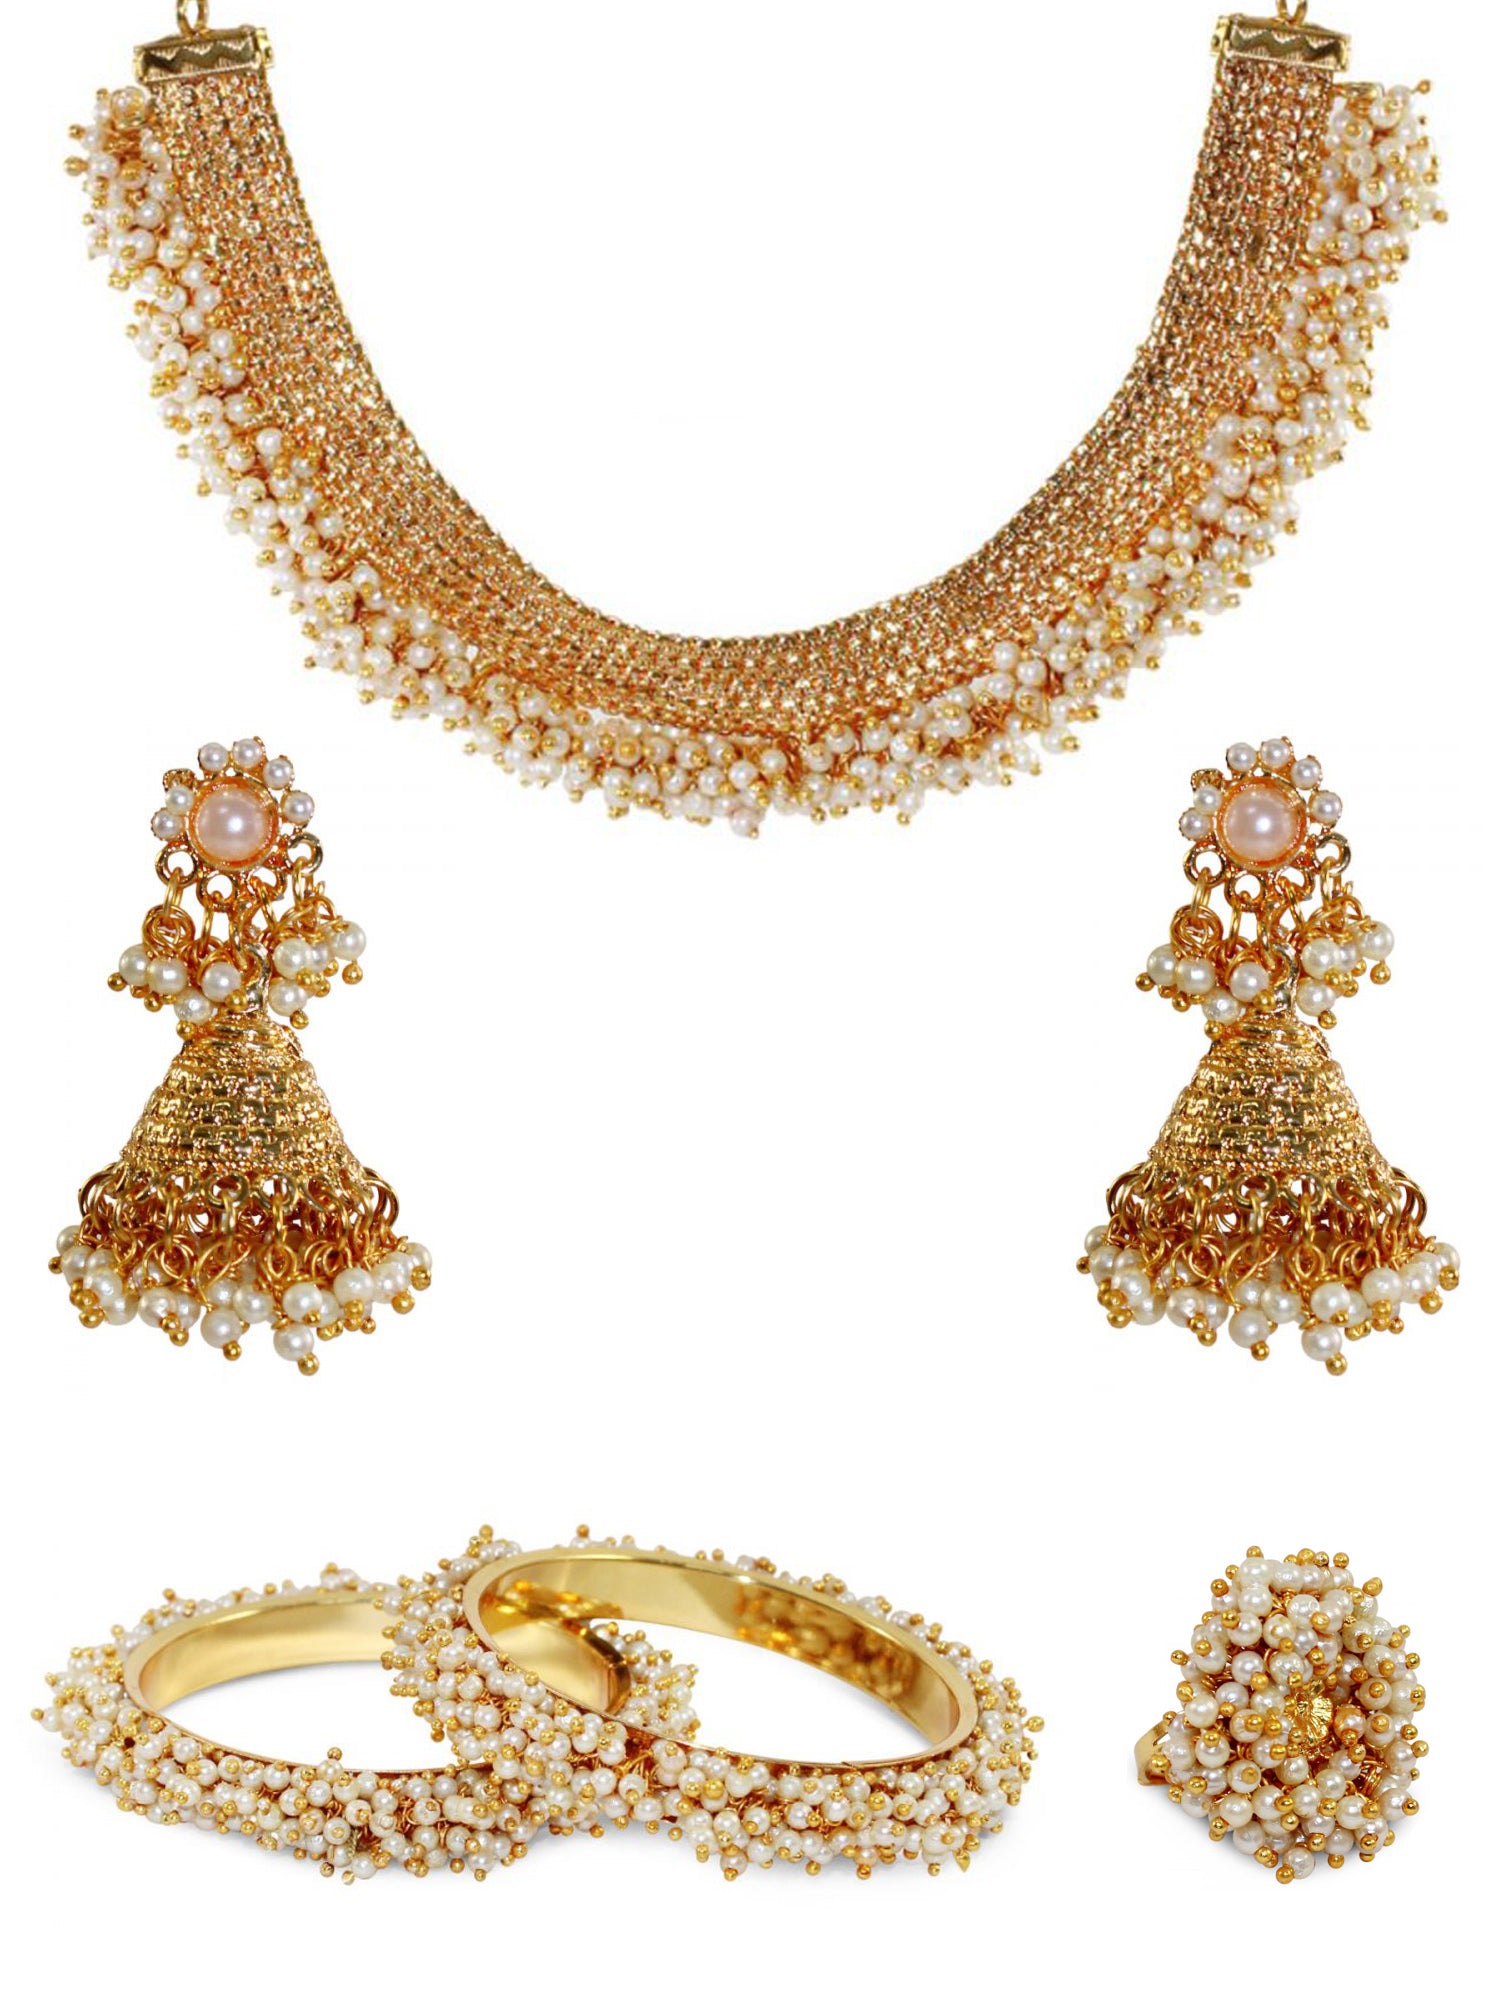 Women's/Girl's Rajwadi Necklace Set With Ring And Bangles - Zaffre Collections